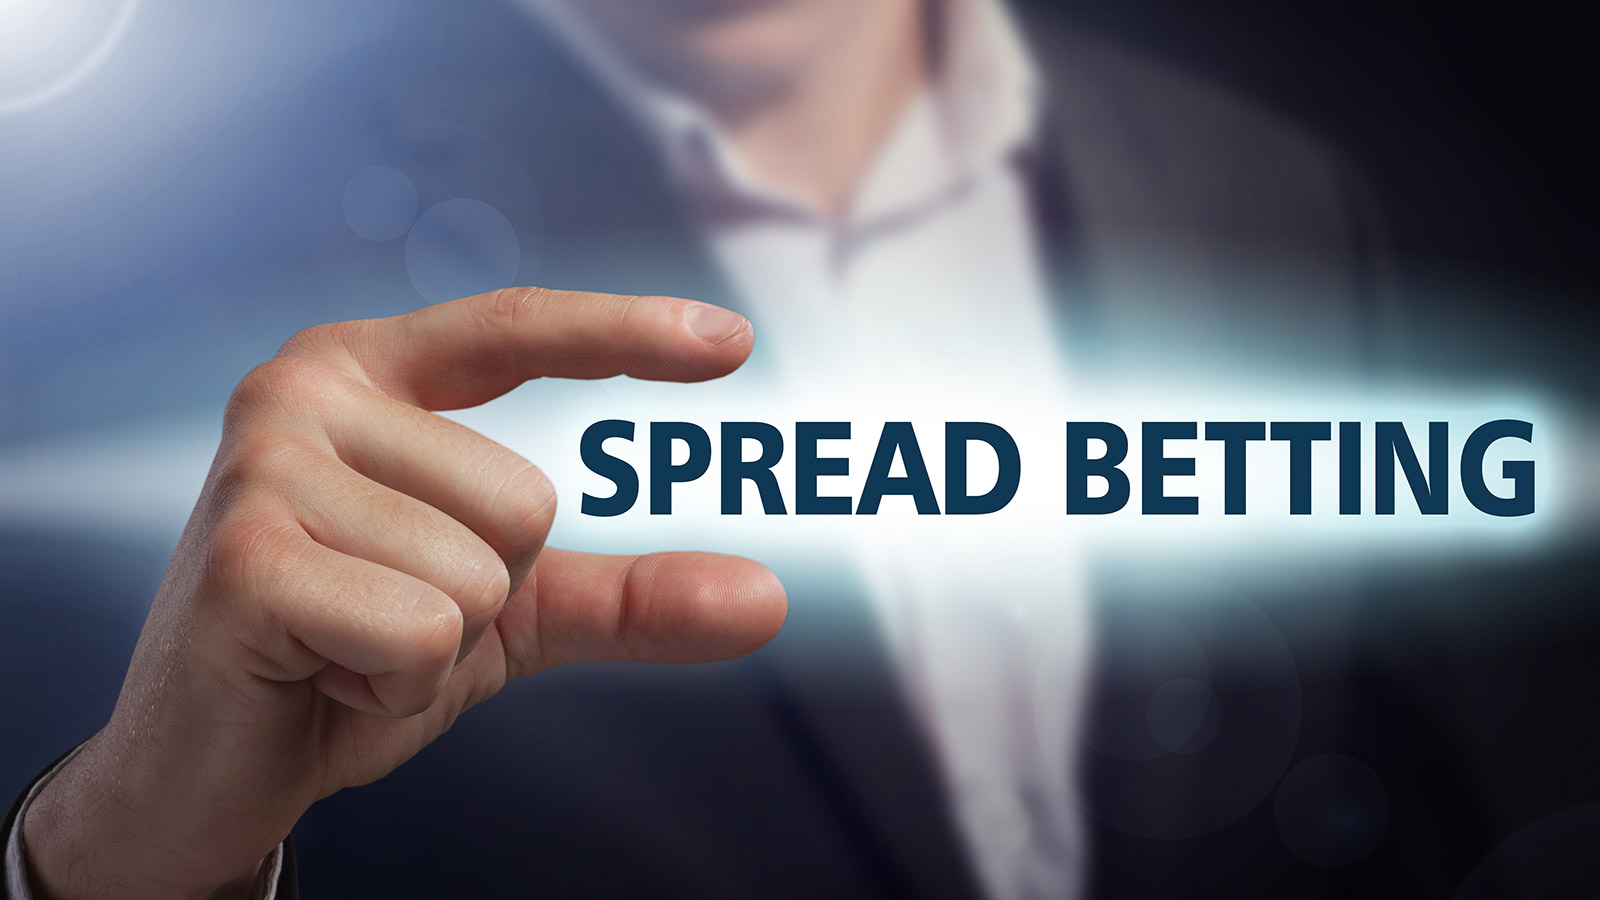 Sports Spread Betting Firms Uk